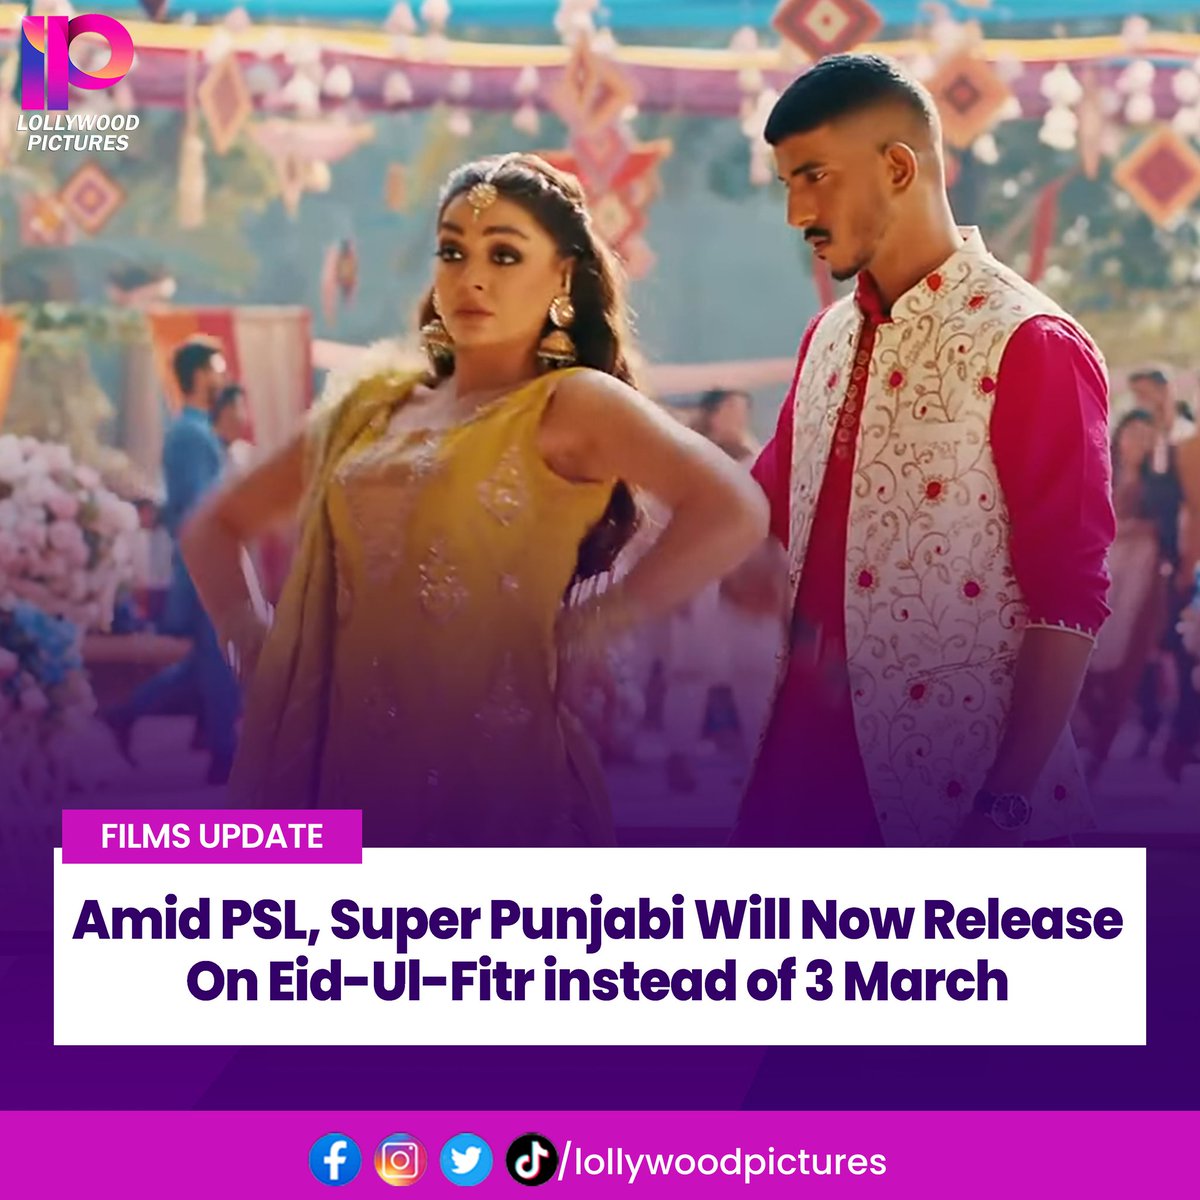 As per sources, #SuperPunjabi's release has been pushed ahead and will now release on Eid-Ul-Fitr considering ongoing #PSL Season. 
Before this, Film was scheduled to release on 3 March. 

#MohsinAbbasHaider #SaimaBaloch #IftikharThakur #AbuAleeha #LollywoodPictures #PunjabiFilm